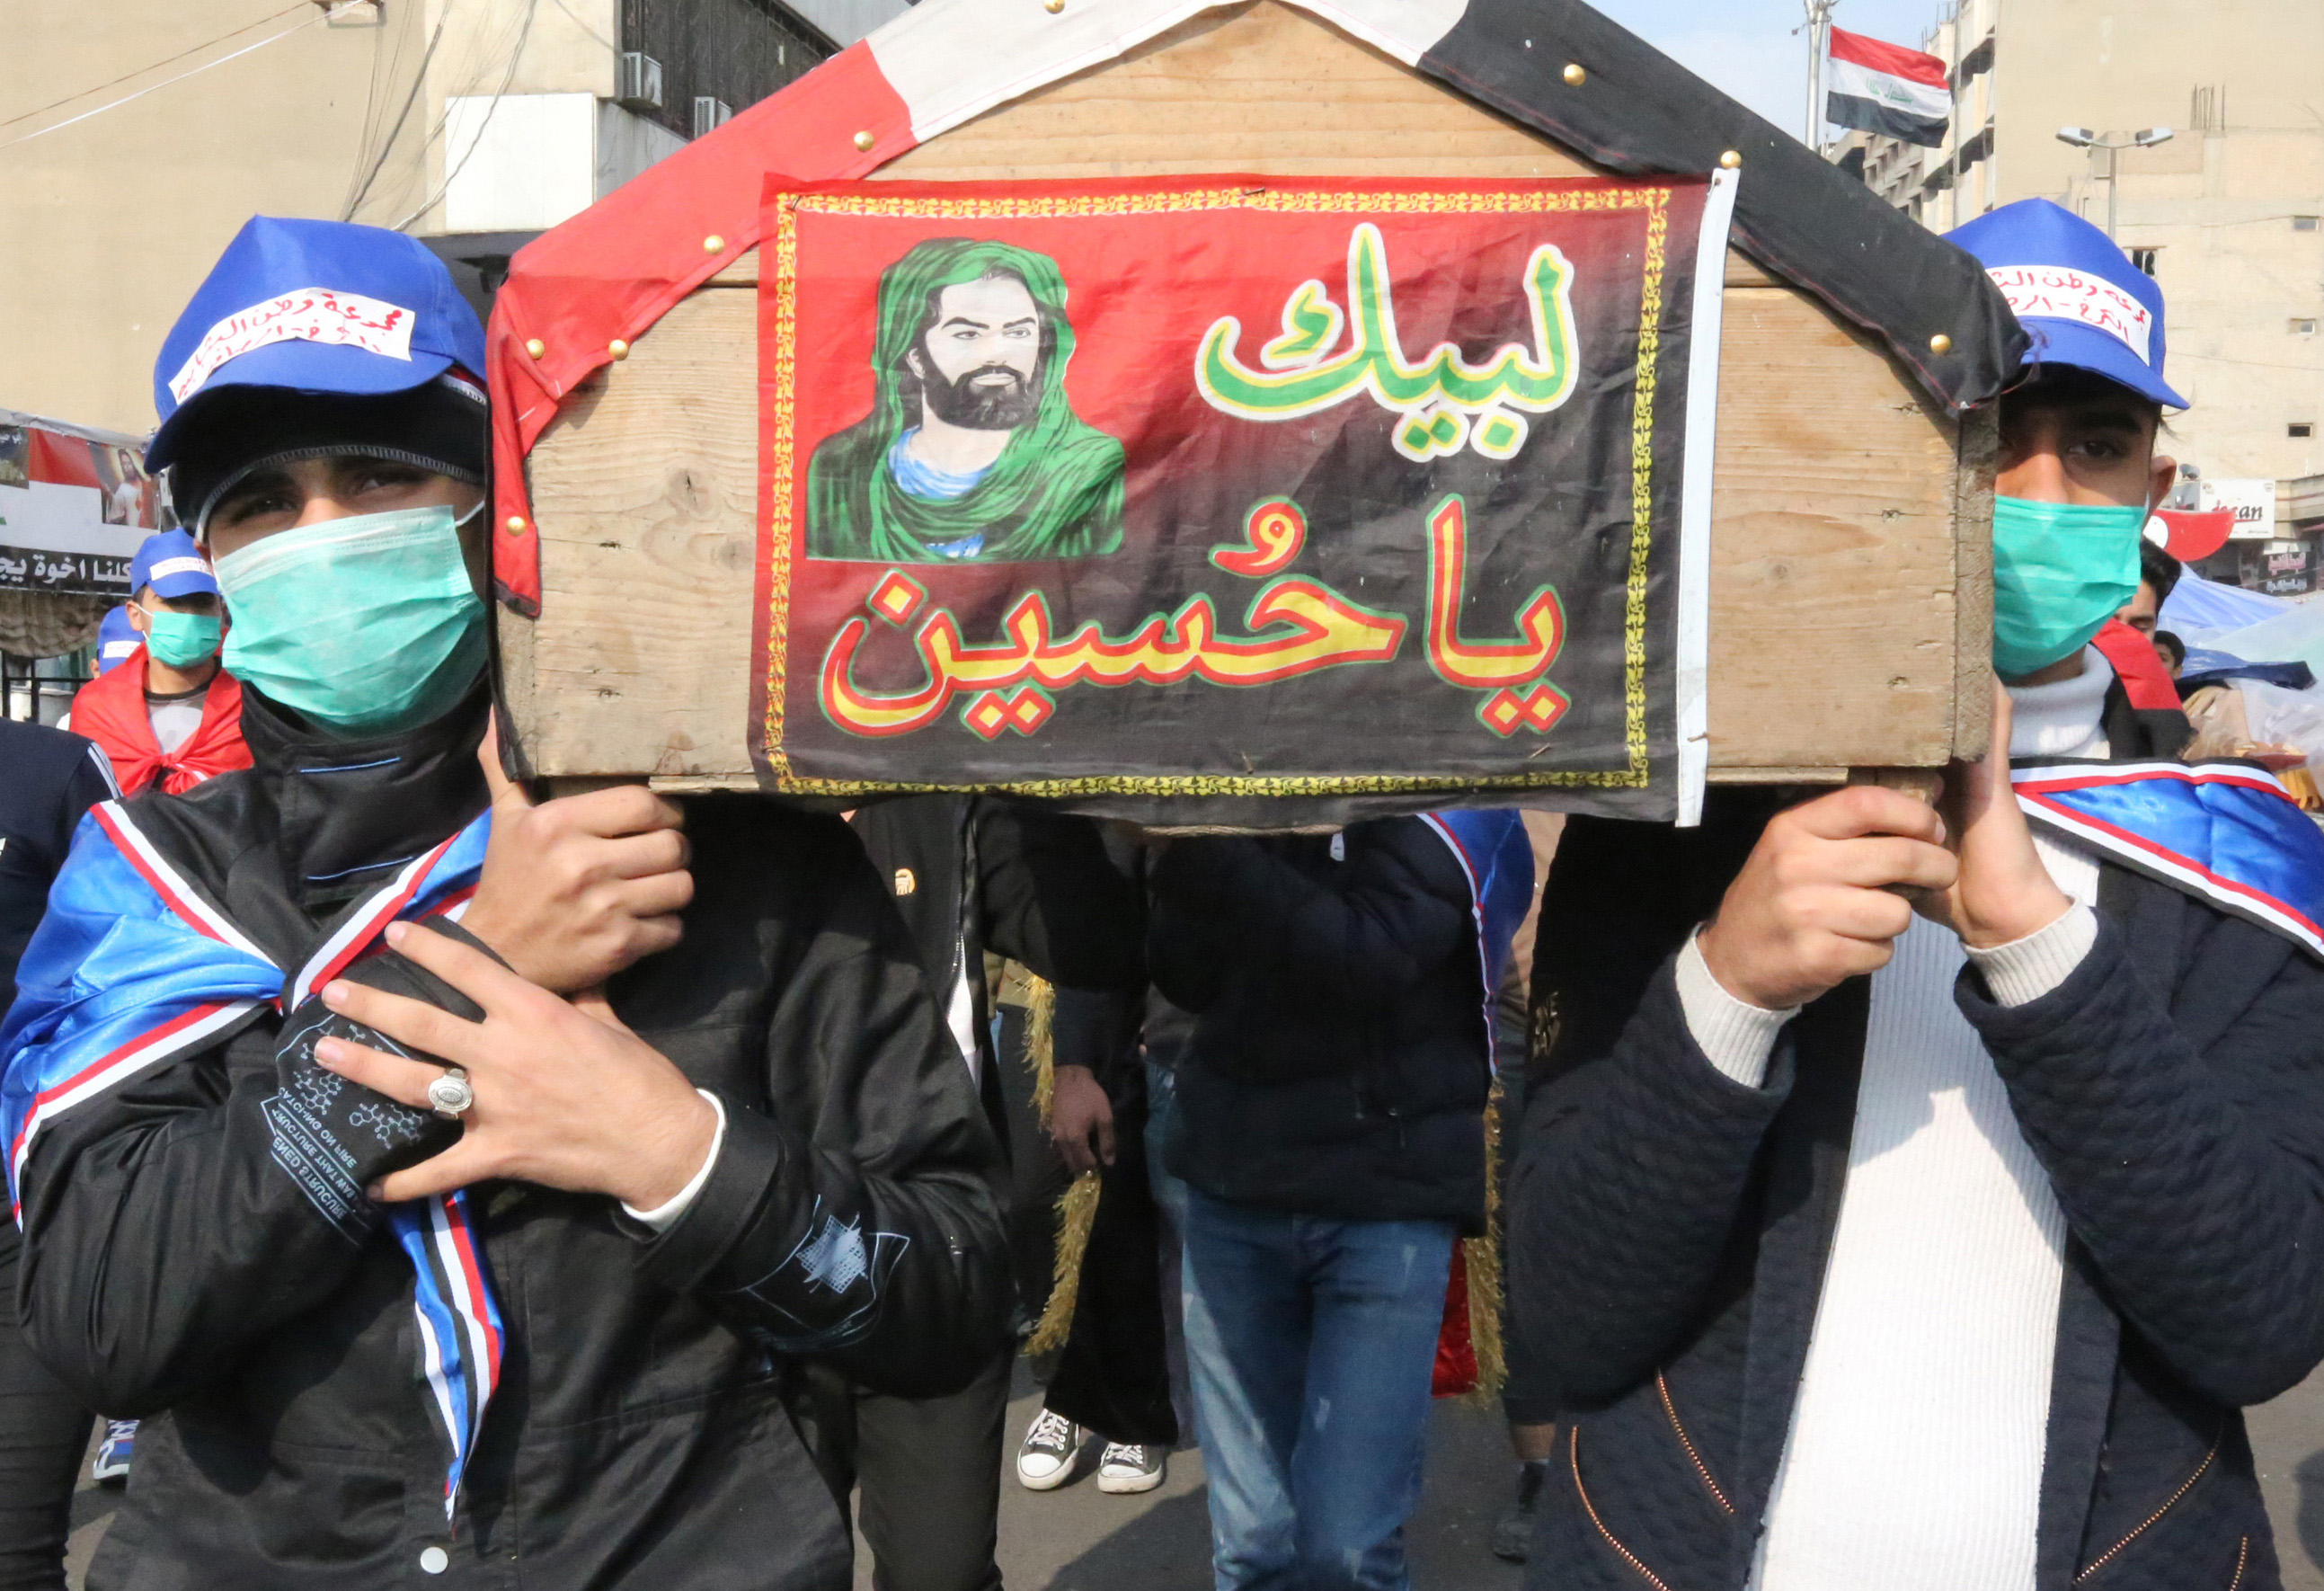 Iraqi demonstrators carry a mock coffin as they march in a symbolic funeral procession in Tahrir square in the capital Baghdad on December 8, 2019